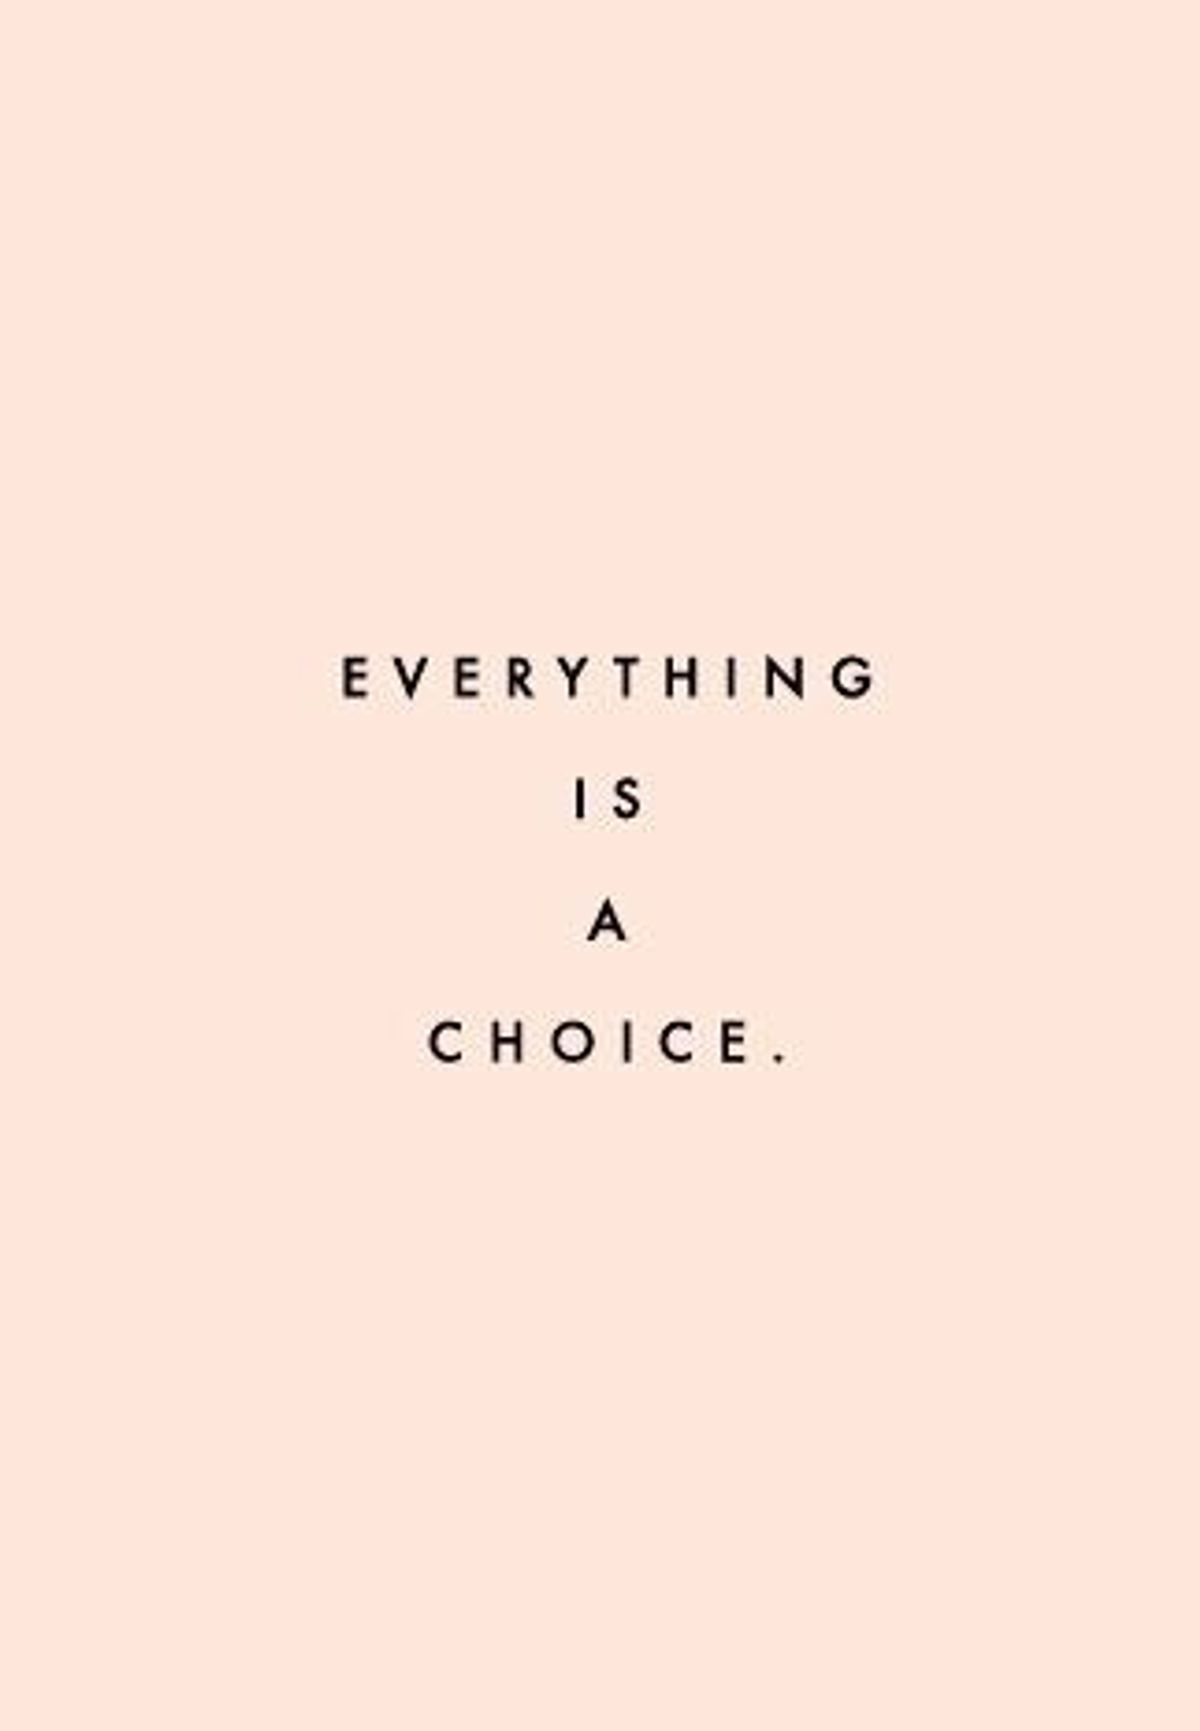 You Are Your Choices: Accept it